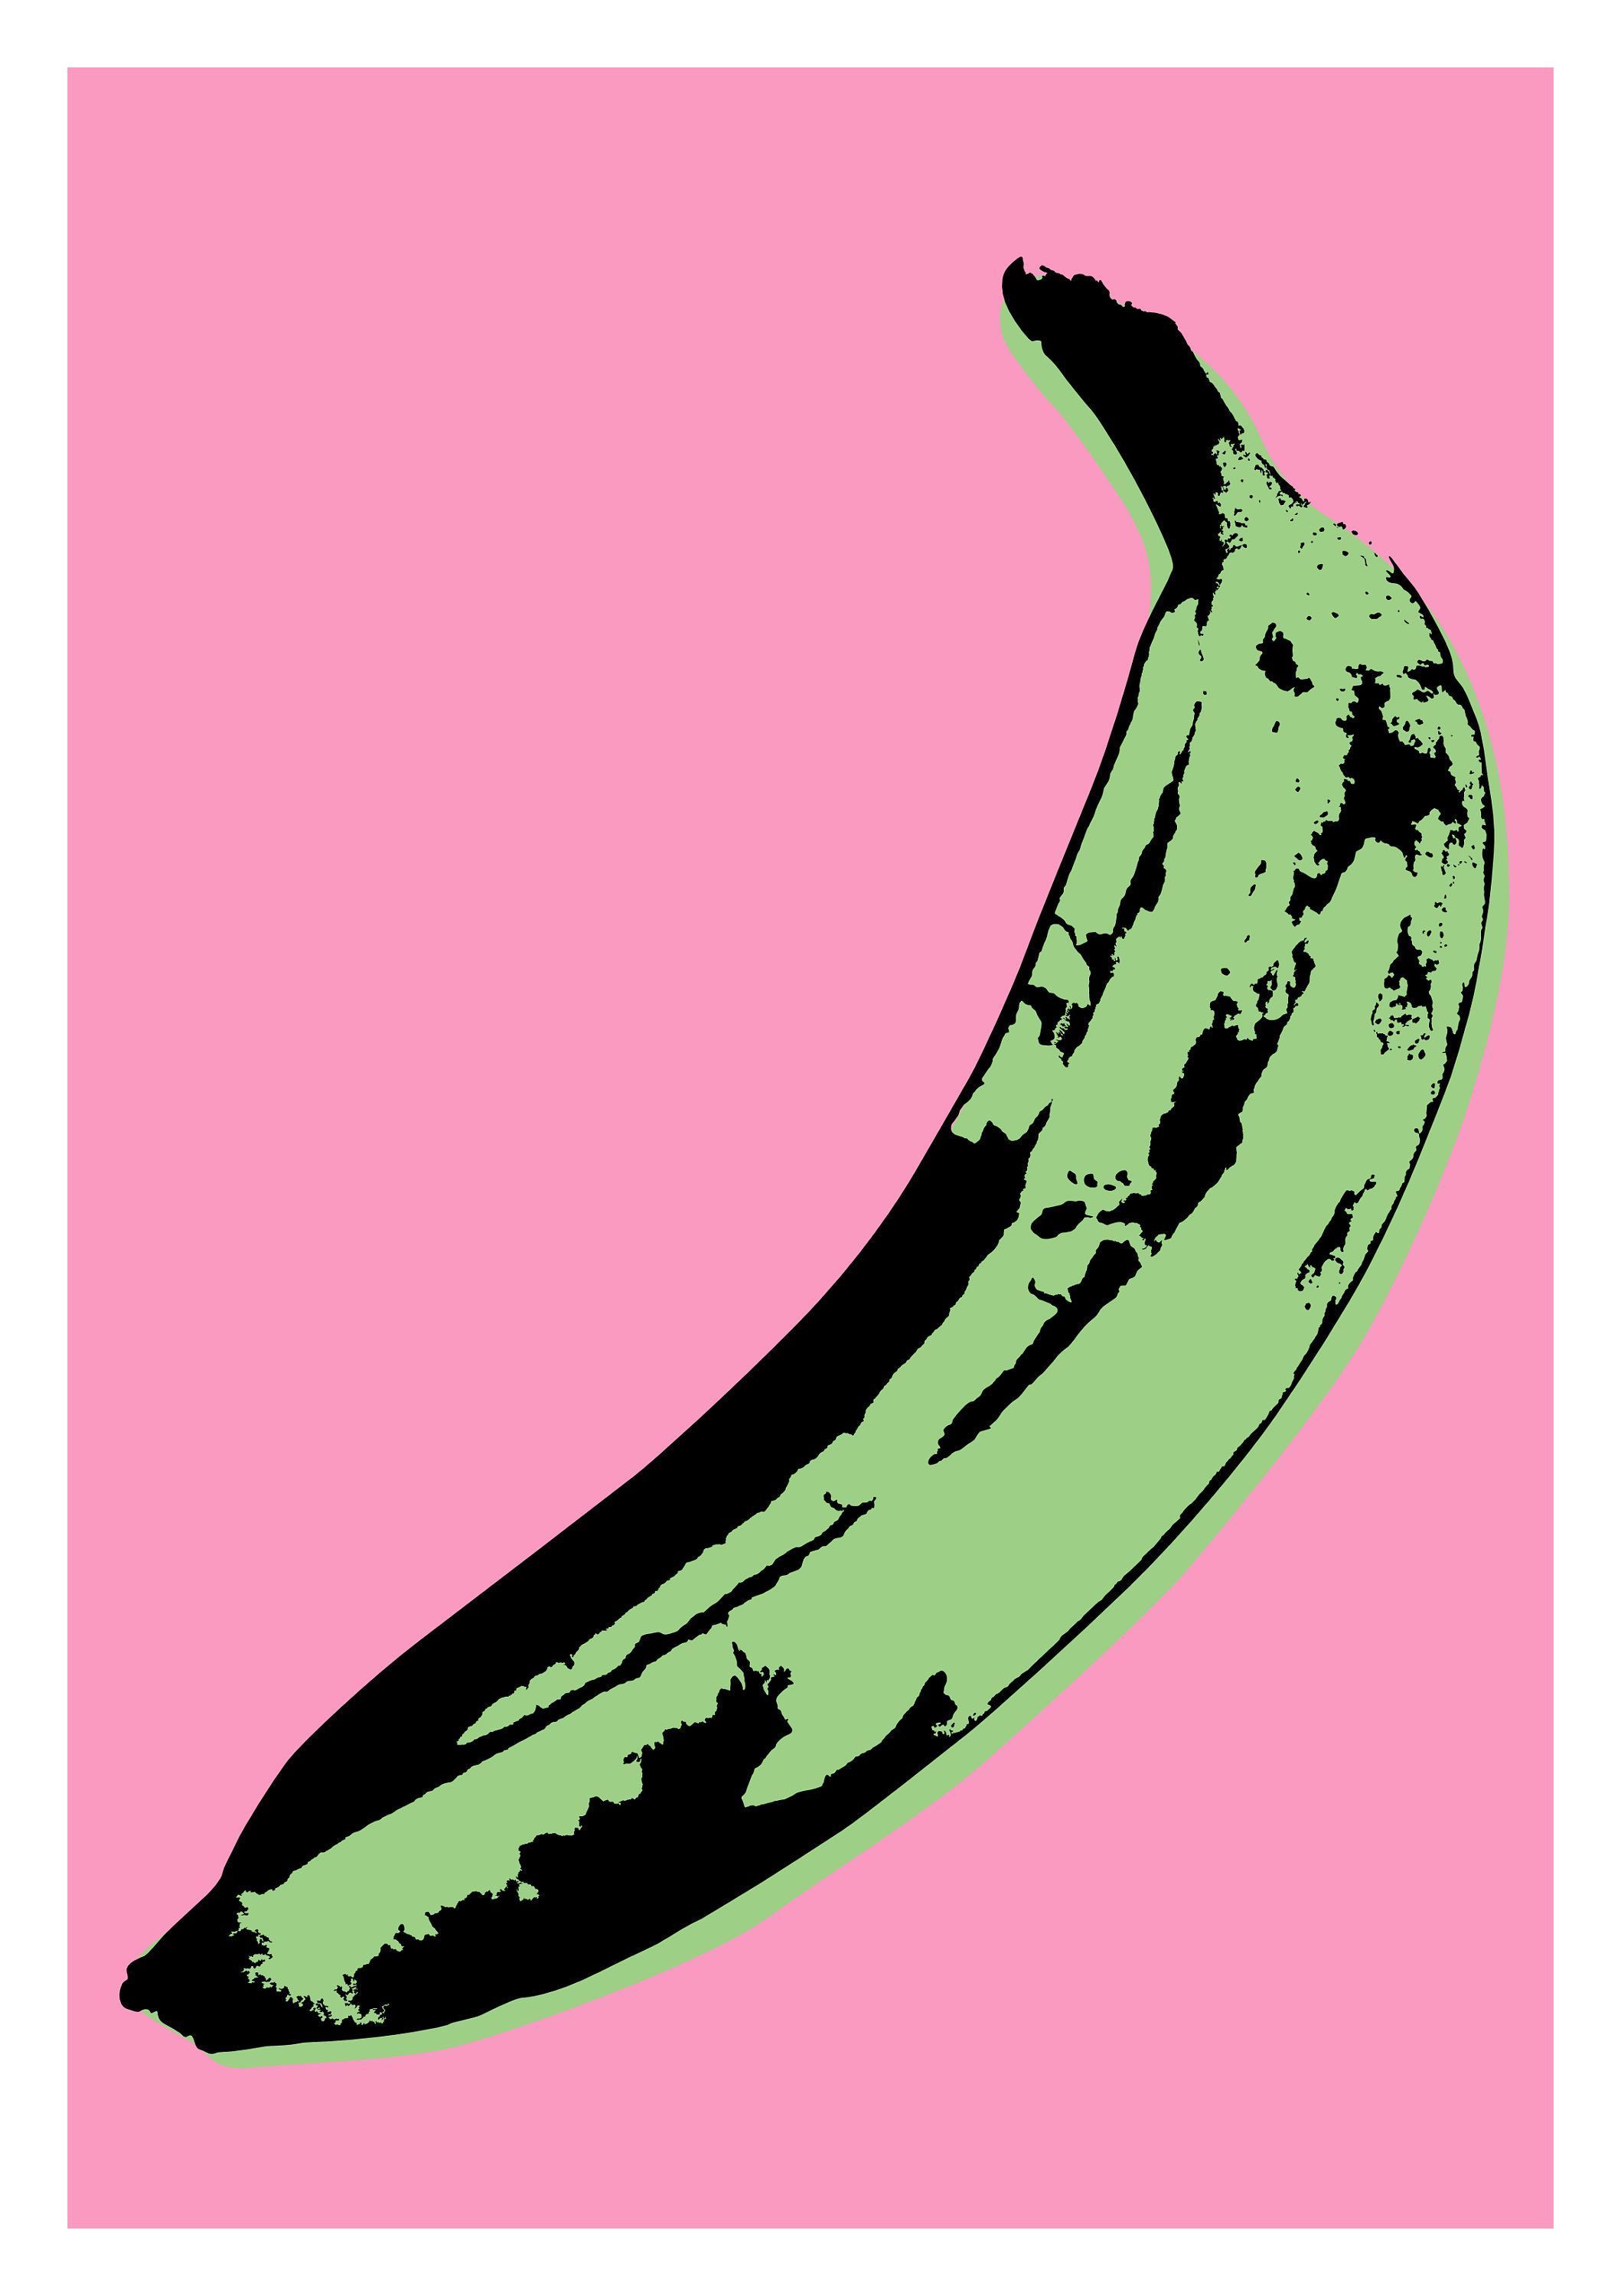 Andy Warhol pop art print poster banana album record cover art home decor wall art print kitchen decor pink poster white modern graphic - Andy Warhol pop art print poster banana album record cover art home decor wall art print kitchen decor pink poster white modern graphic -   18 fitness Art poster ideas